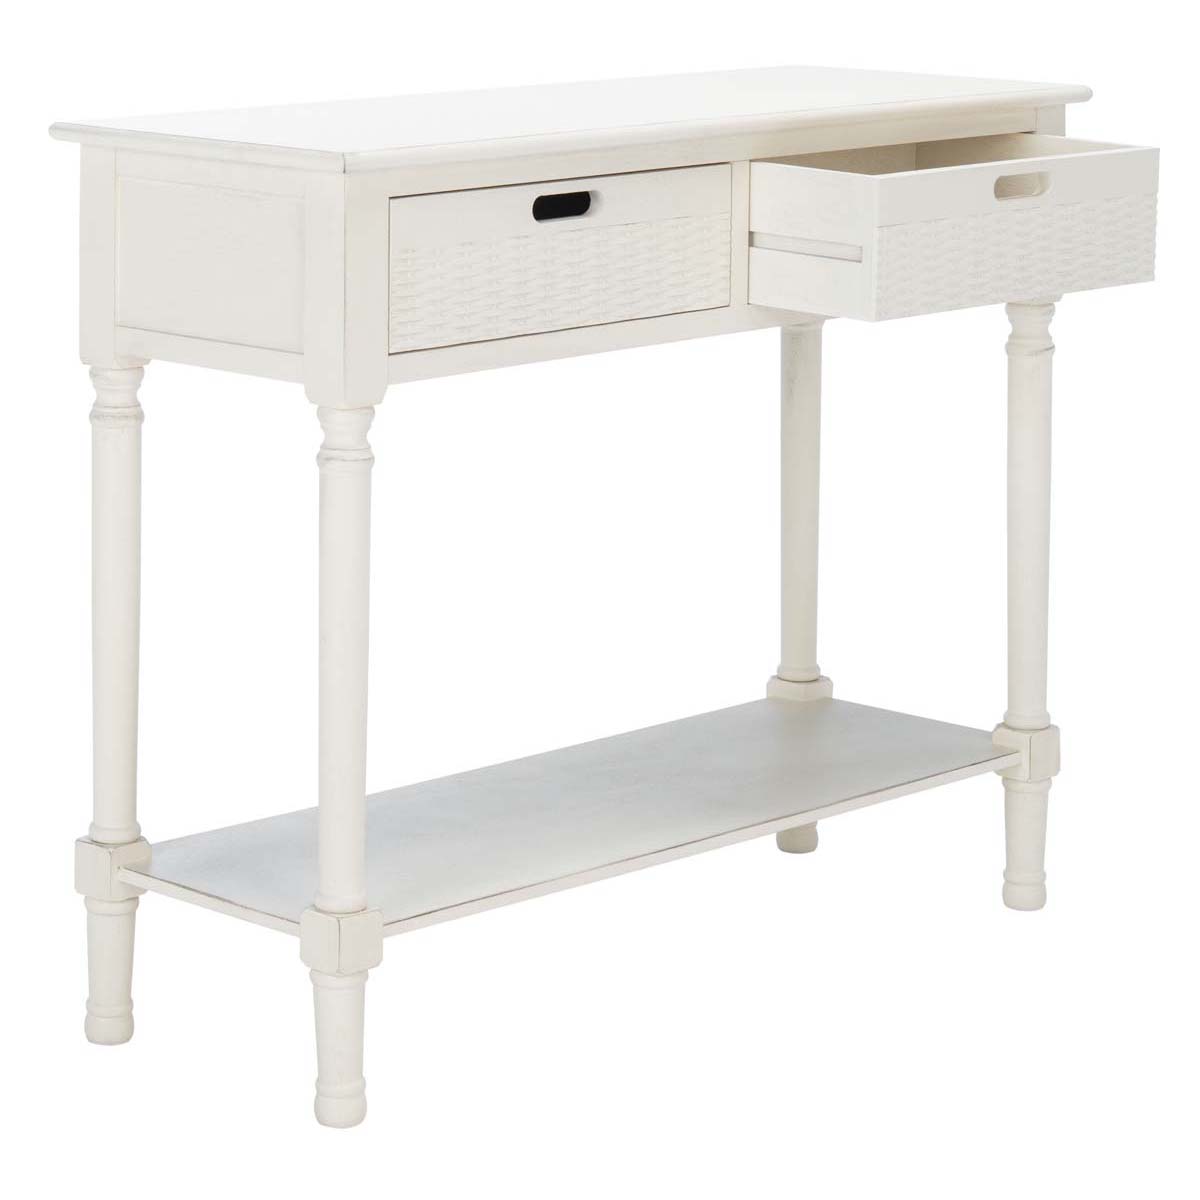 Safavieh Landers 2 Drawer Console, CNS5710 - Distressed White